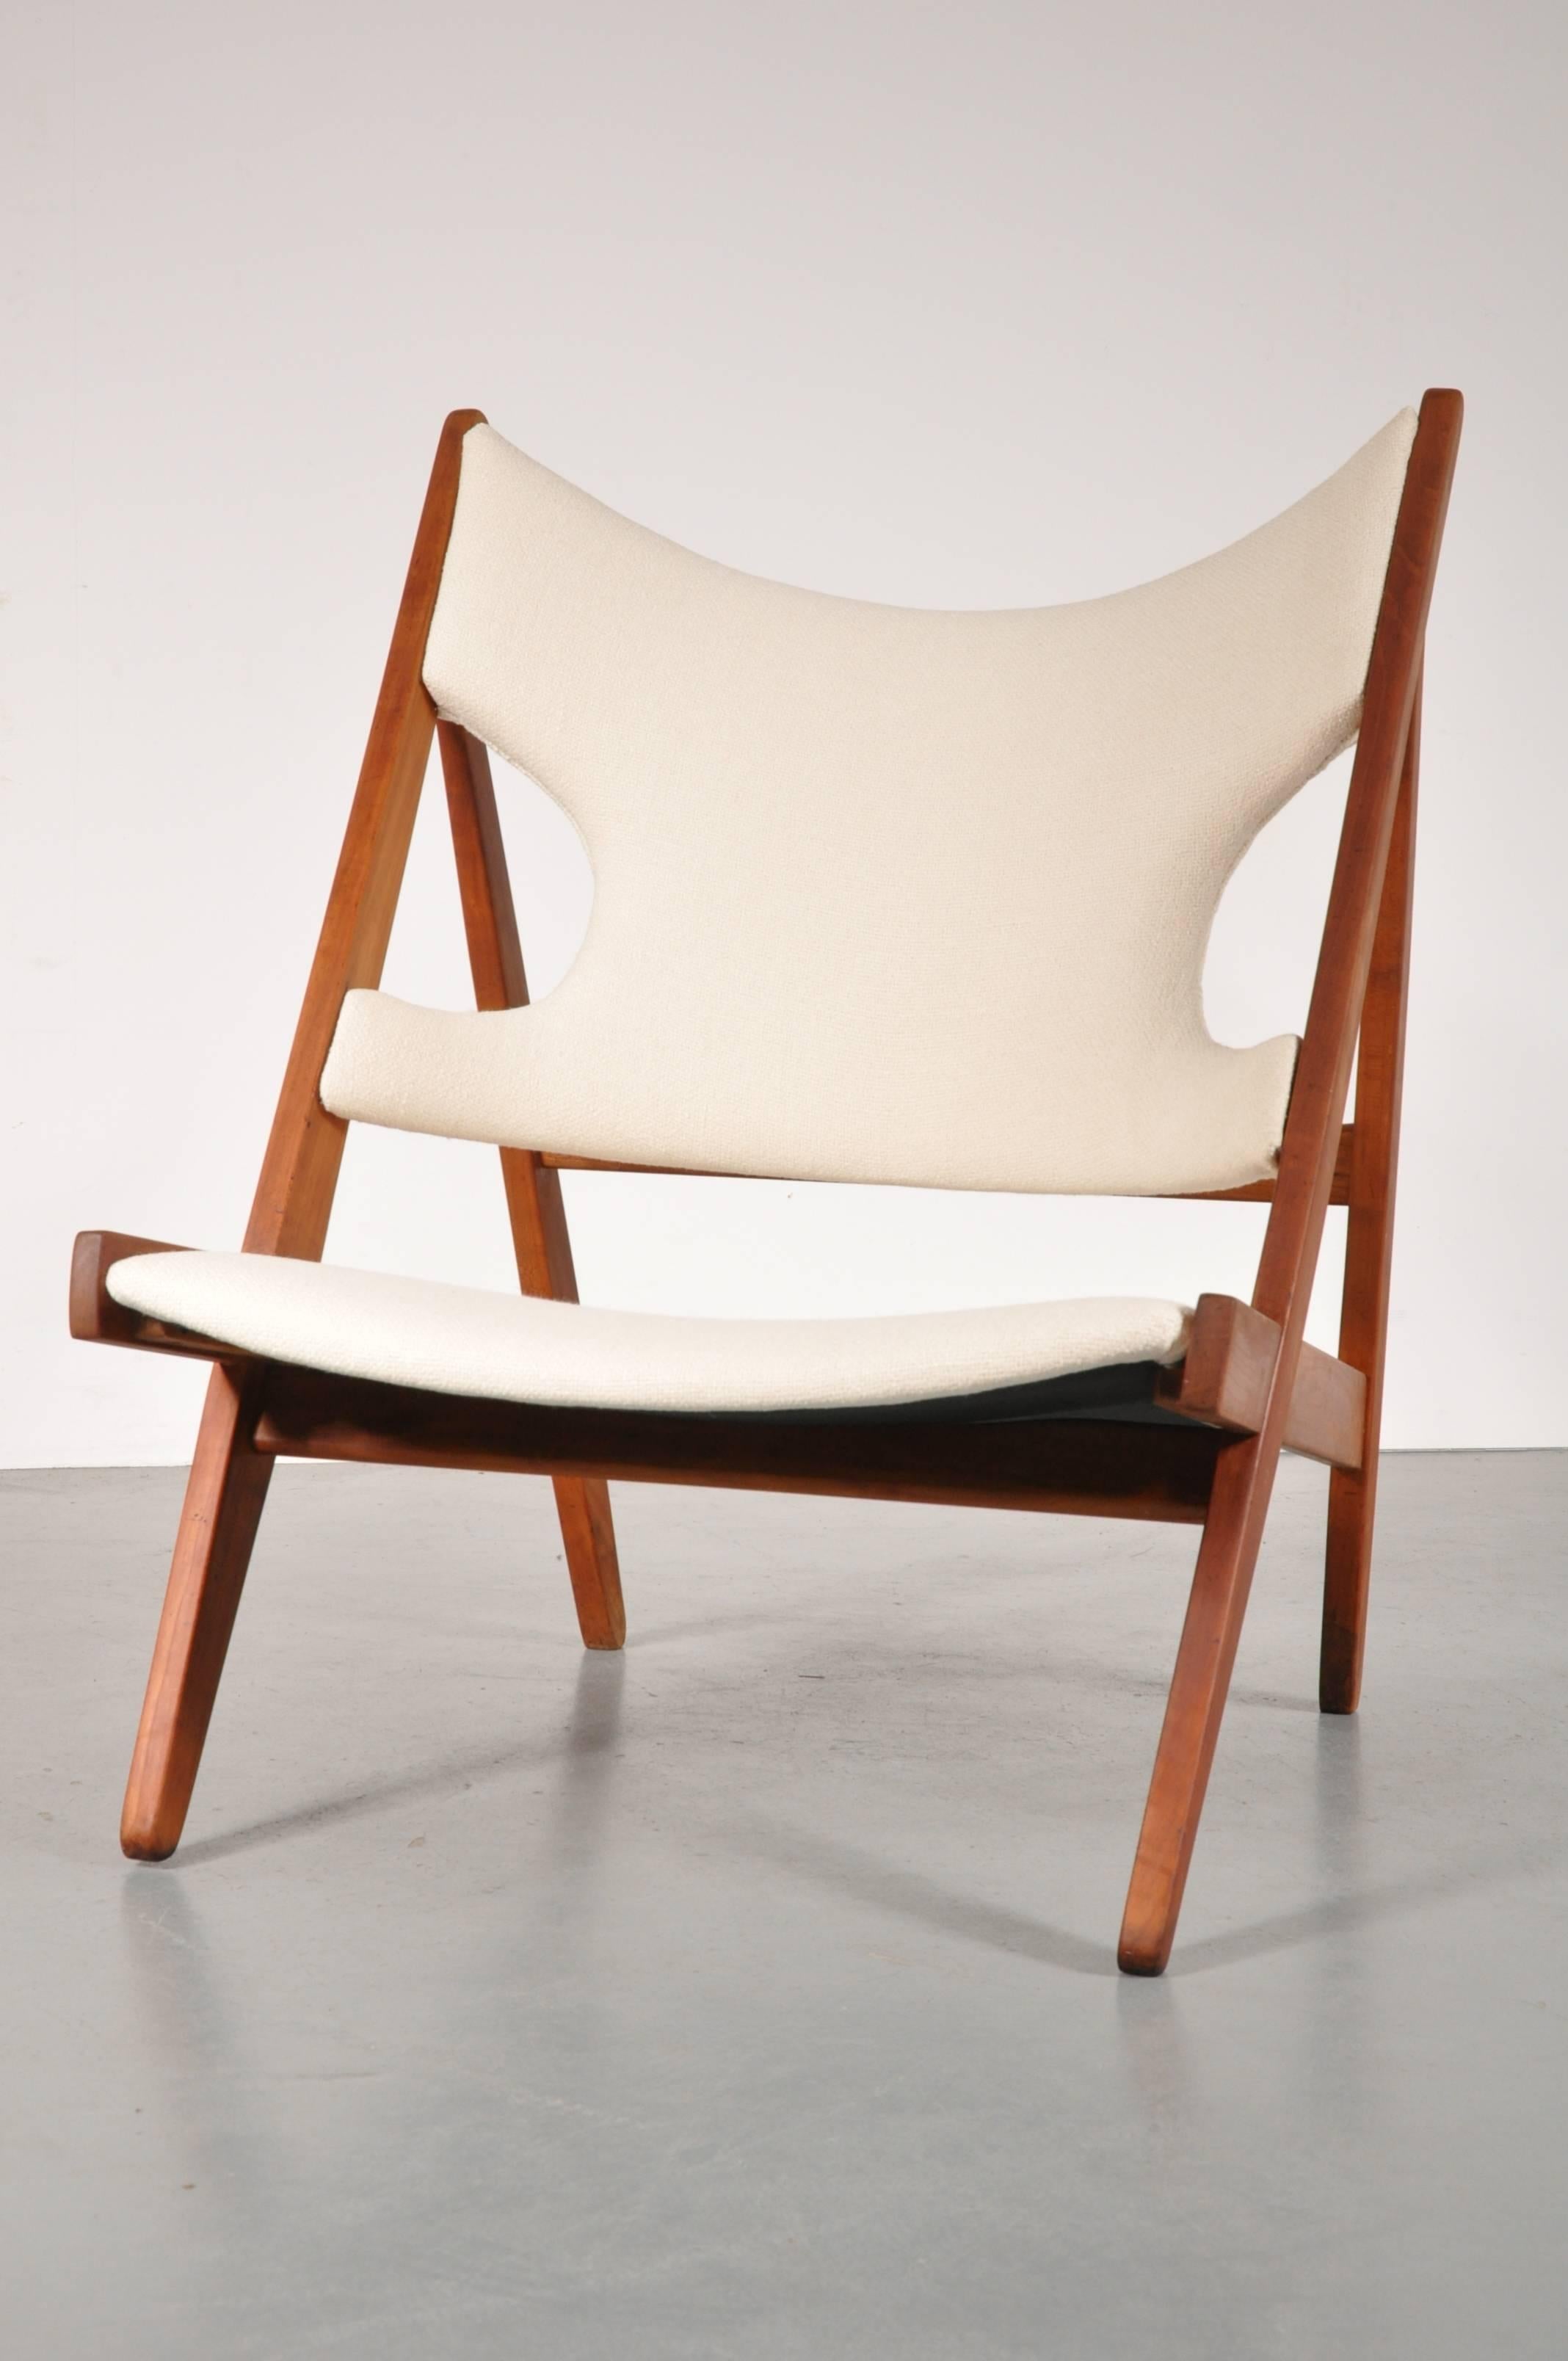 A very rare knitting chair designed by Ib Kofod Larsen, manufactured by Christensen and Larsen in Denmark, circa 1950.

This chair is very rare, as only a very few pieces have been produced. This piece has a high quality waxed ash wooden base,